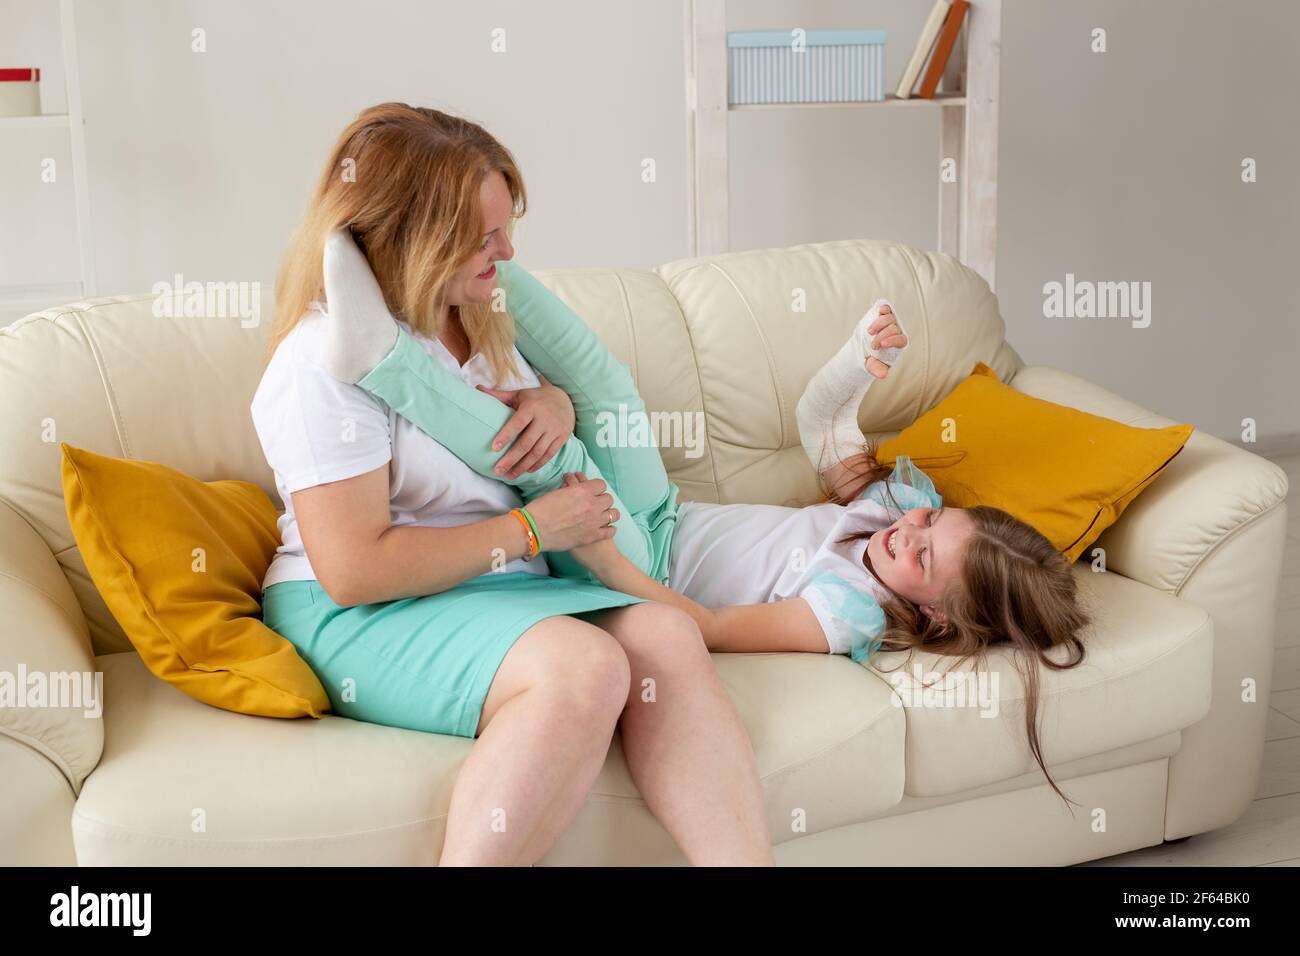 Child with broken arm and gypsum spend time at home with mother. Childhood illnesses, a positive outlook and recovery. Stock Photo